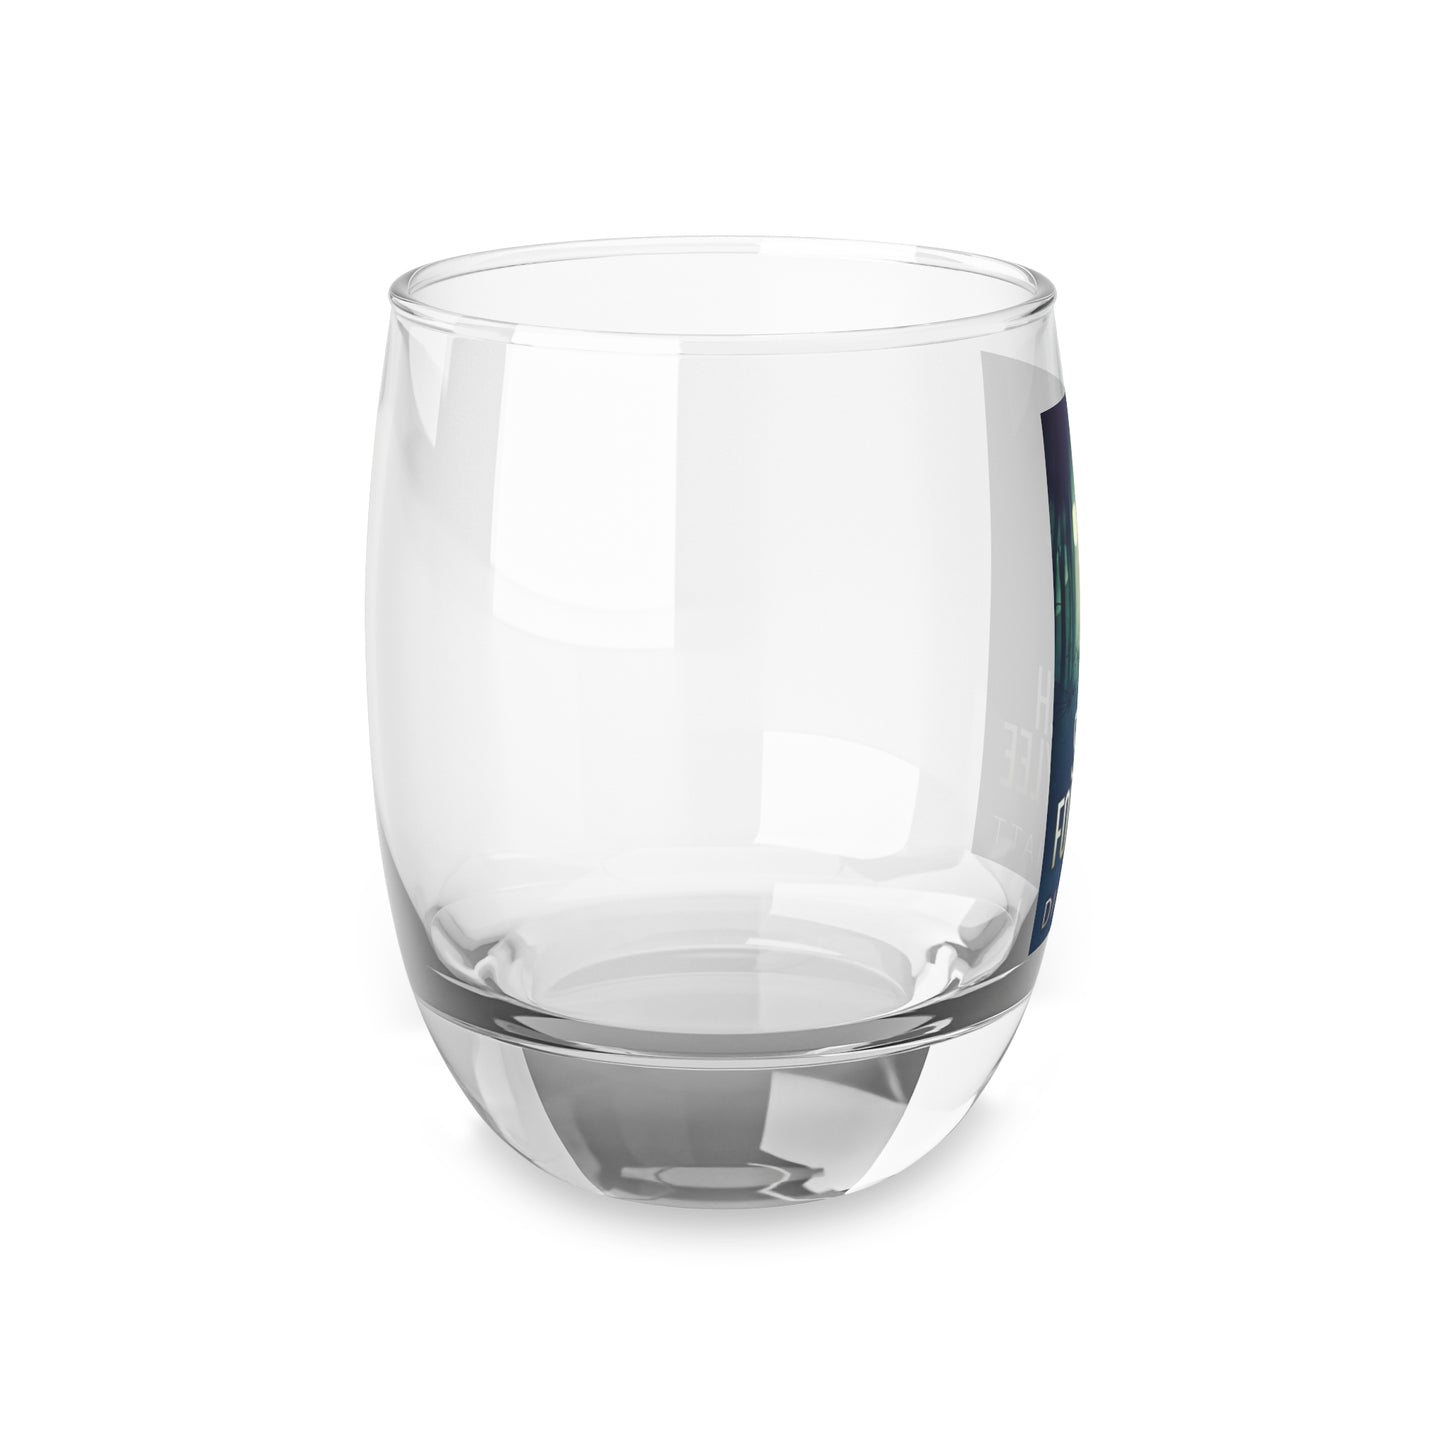 Search for Maylee - Whiskey Glass